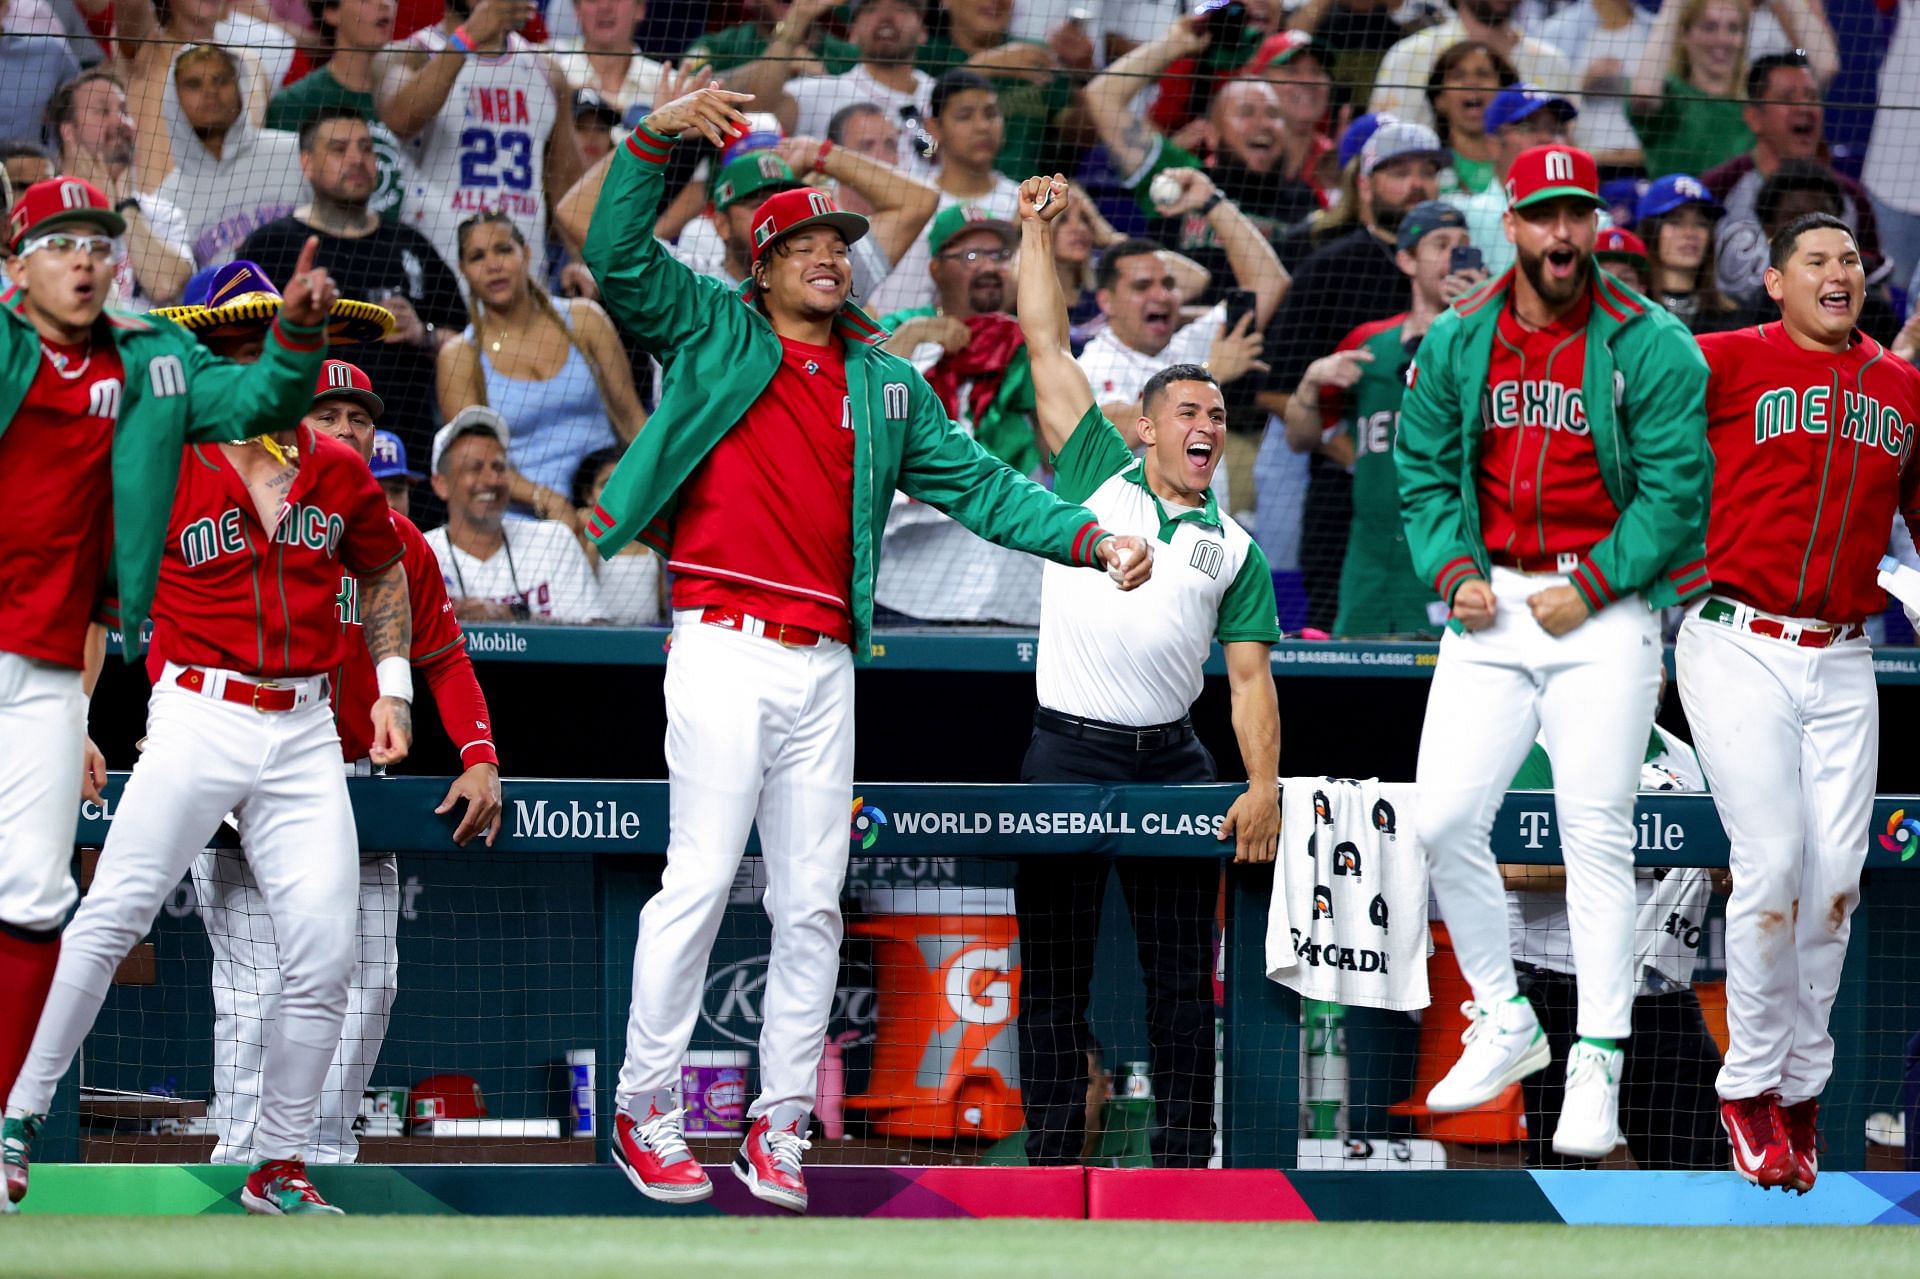 The Team Mexico dugout reacts in the game against Team Puerto Rico in the WBC Quarterfinals game at loanDepot park